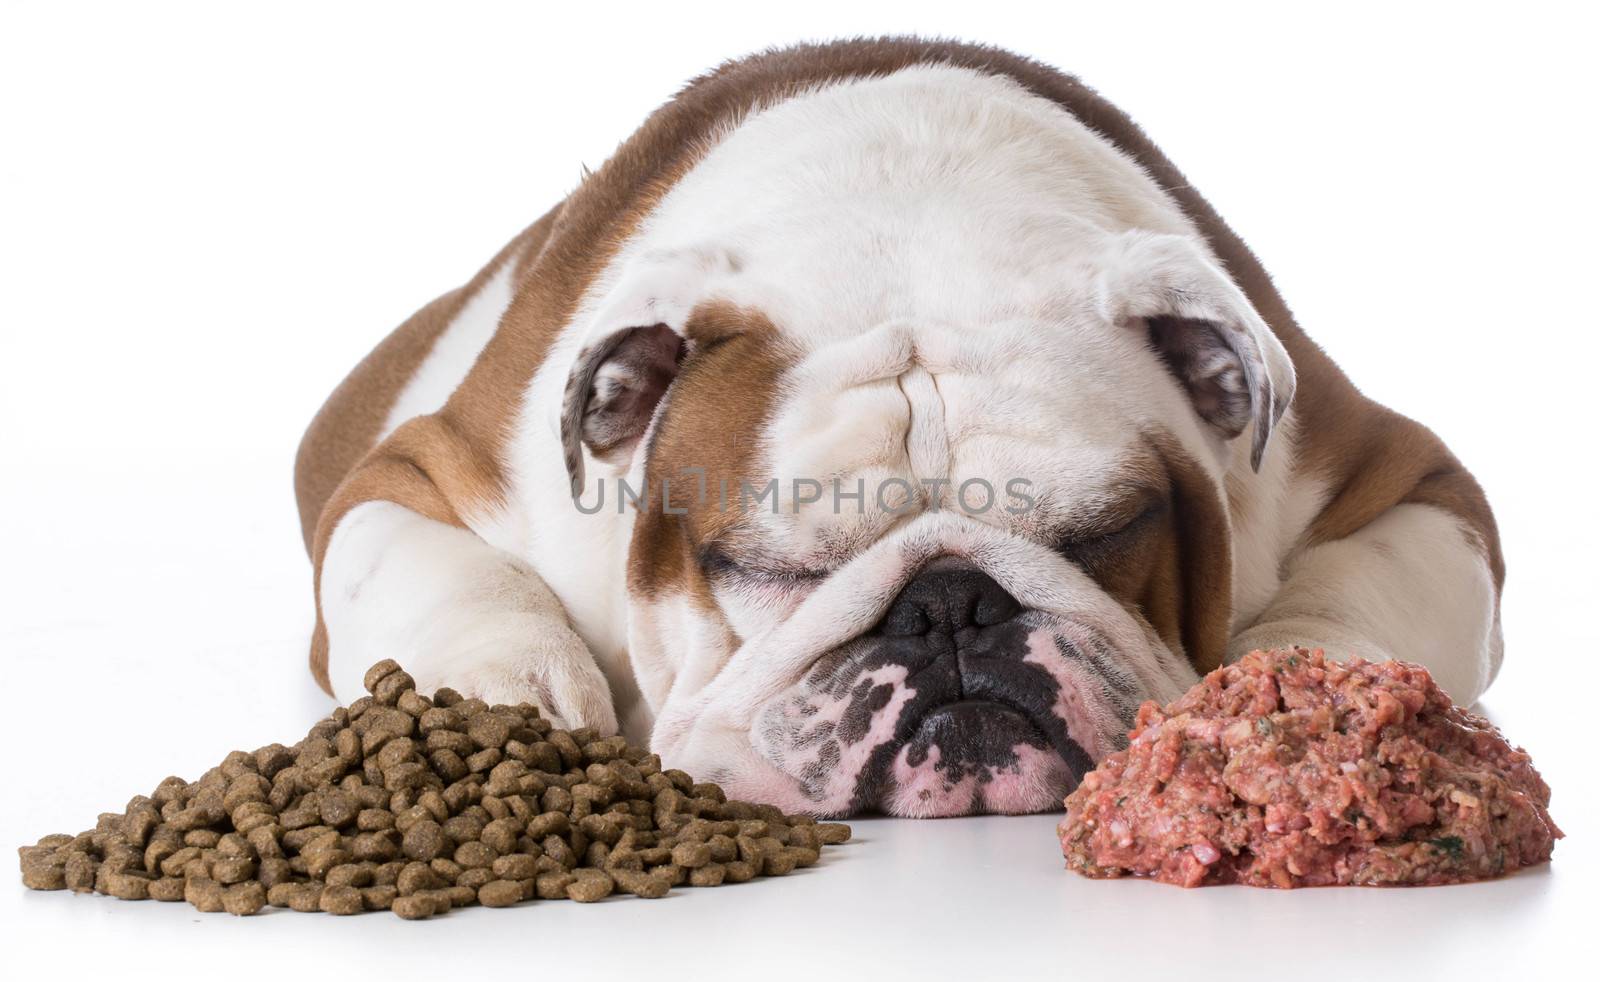 dog laying between pile of kibble and raw dog food on white background - bulldog